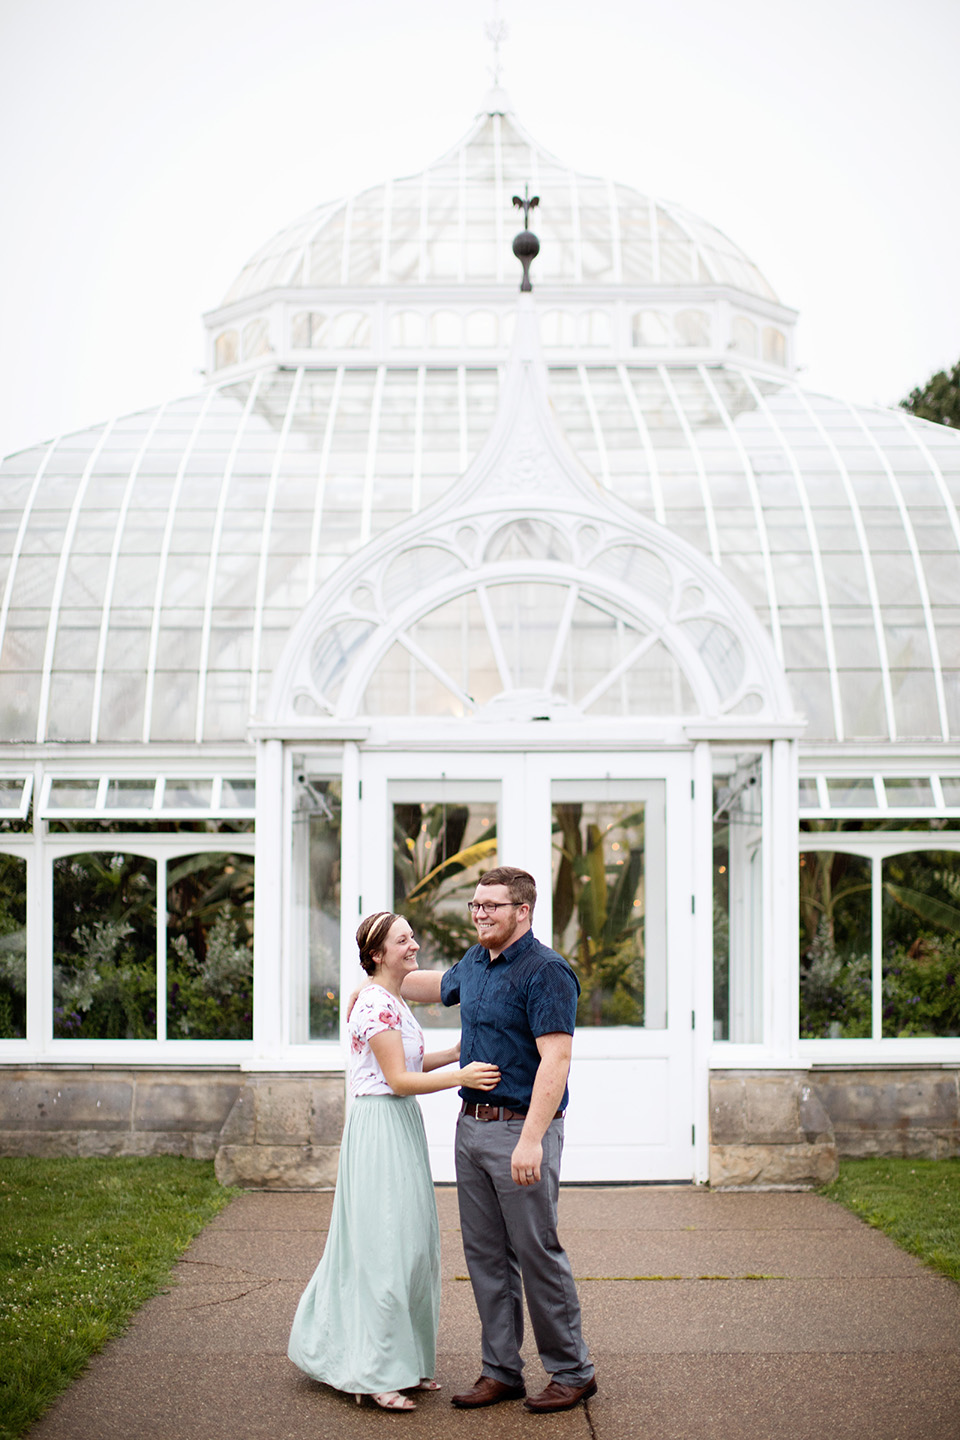 PHIPPS CONSERVATORY ENGAGEMENT PHOTO SESSION-PITTSBURGH, PA-LORENE+DUANE- 16